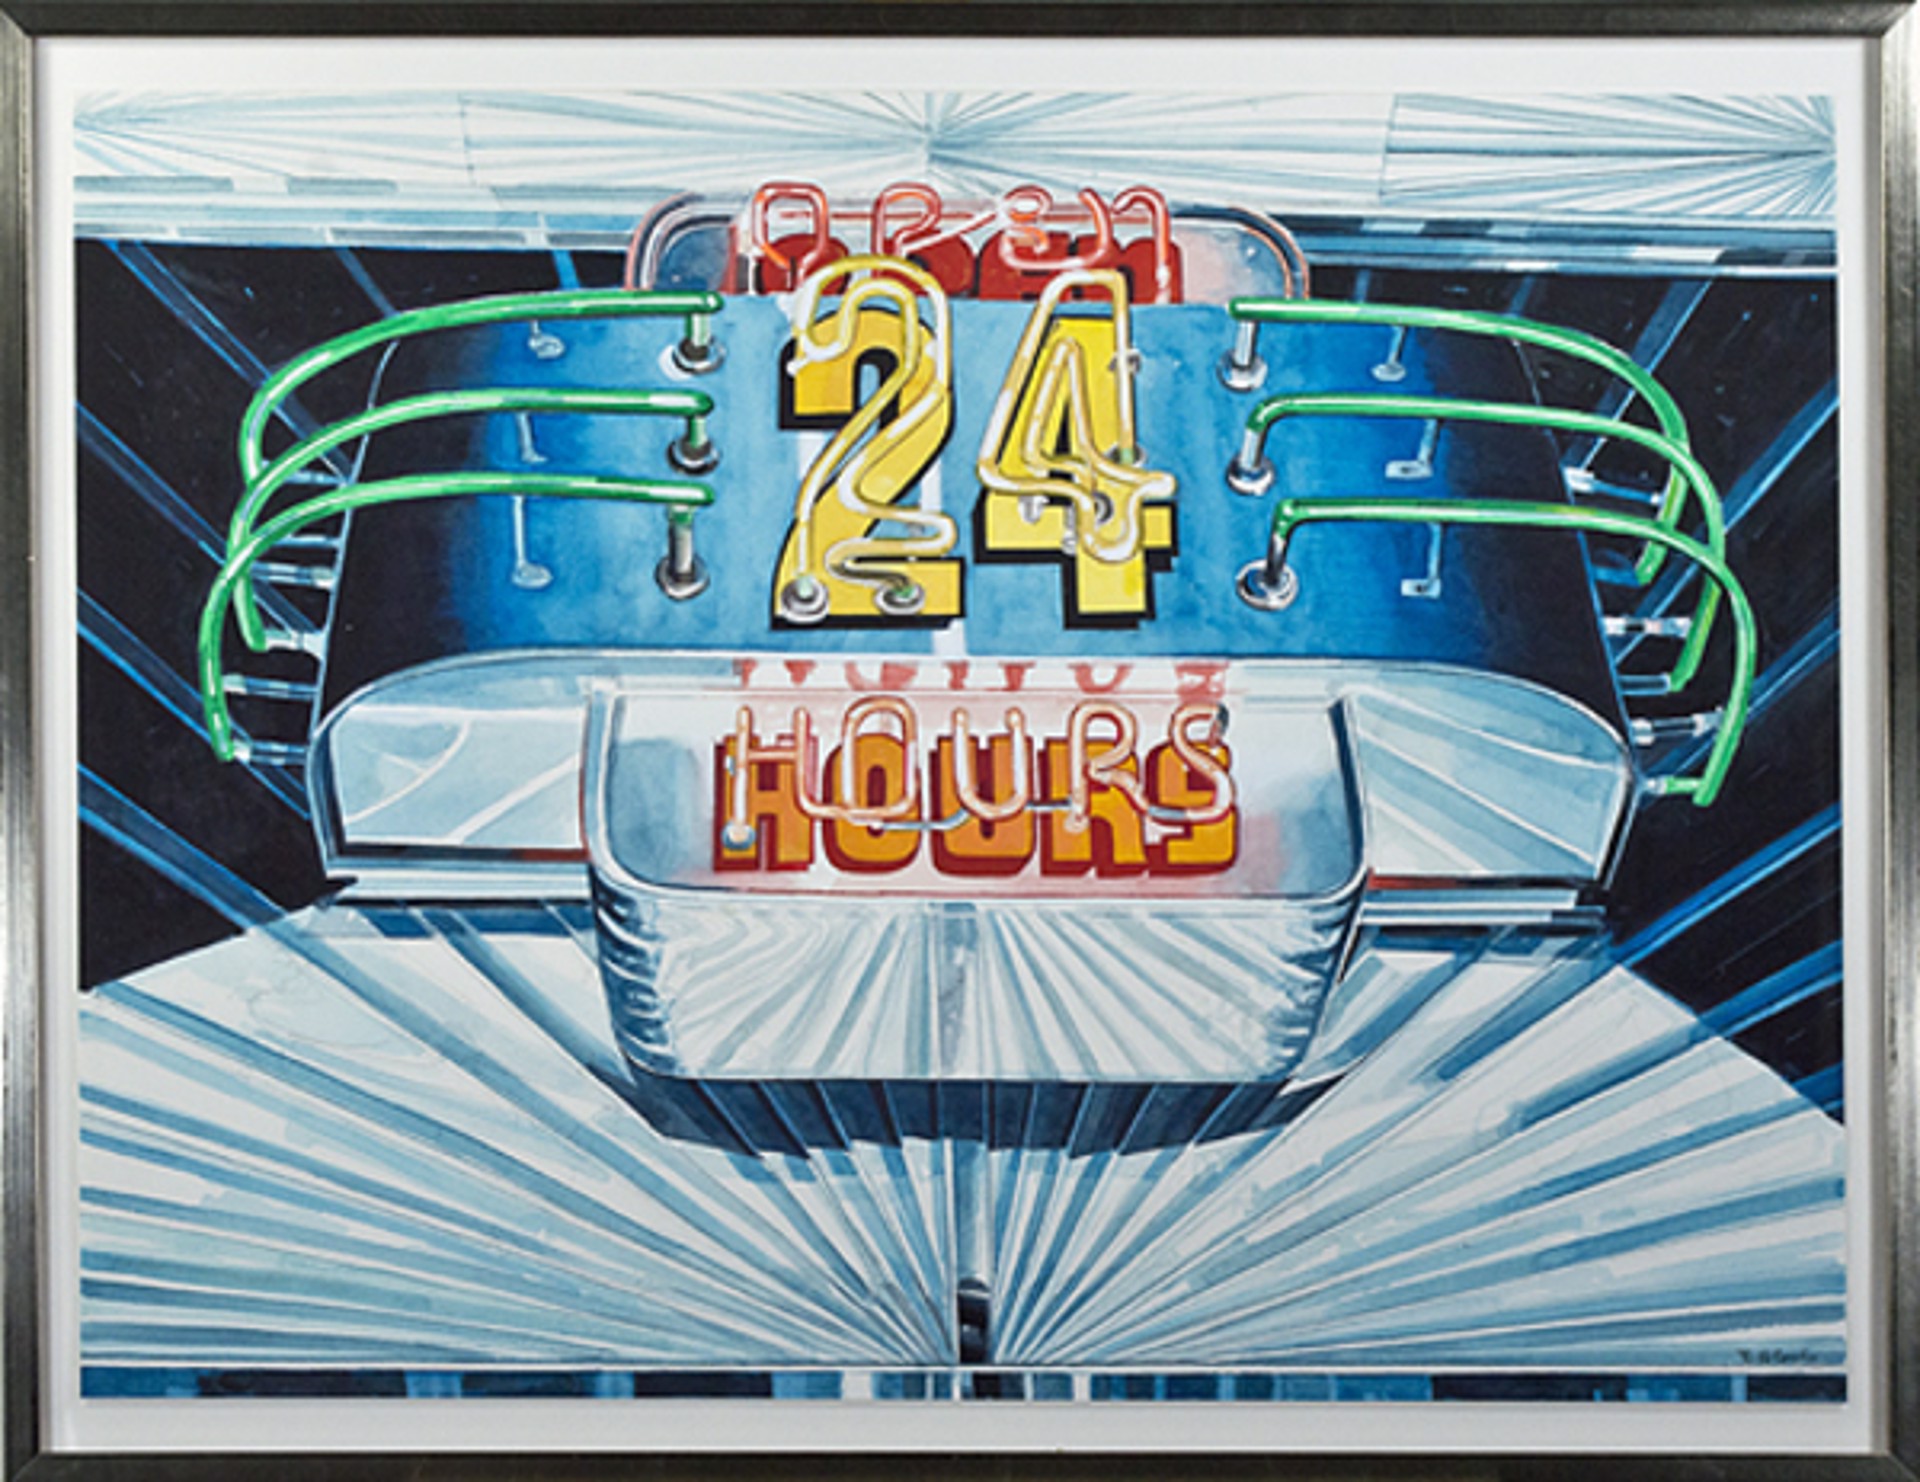 Open 24 Hours by Bruce McCombs